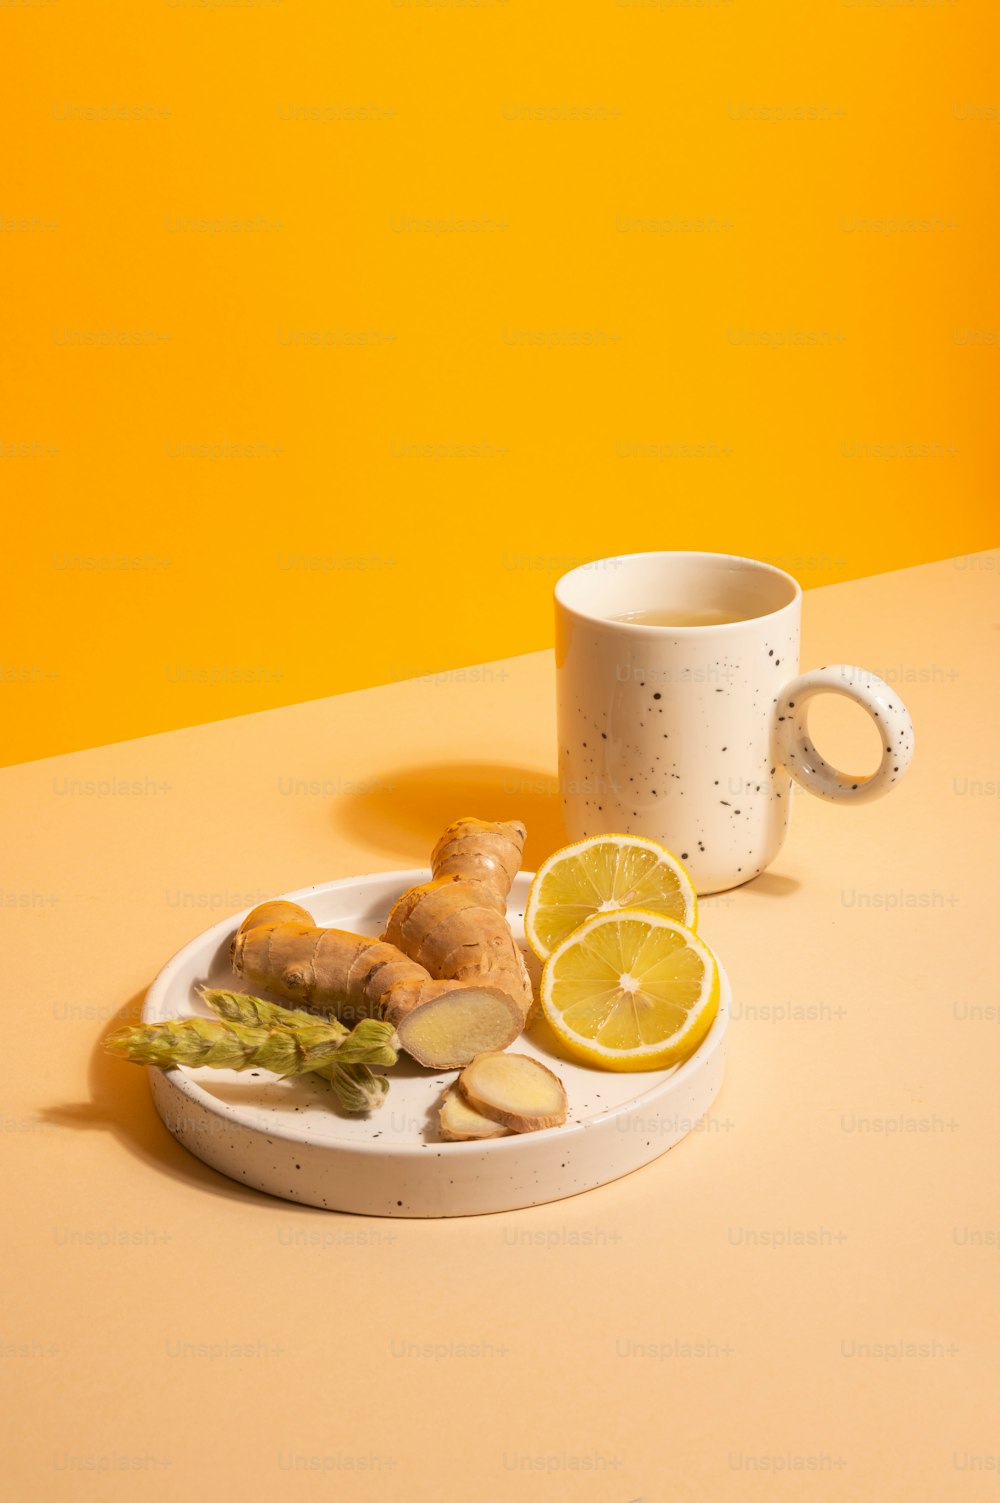 a plate of food and a cup on a table